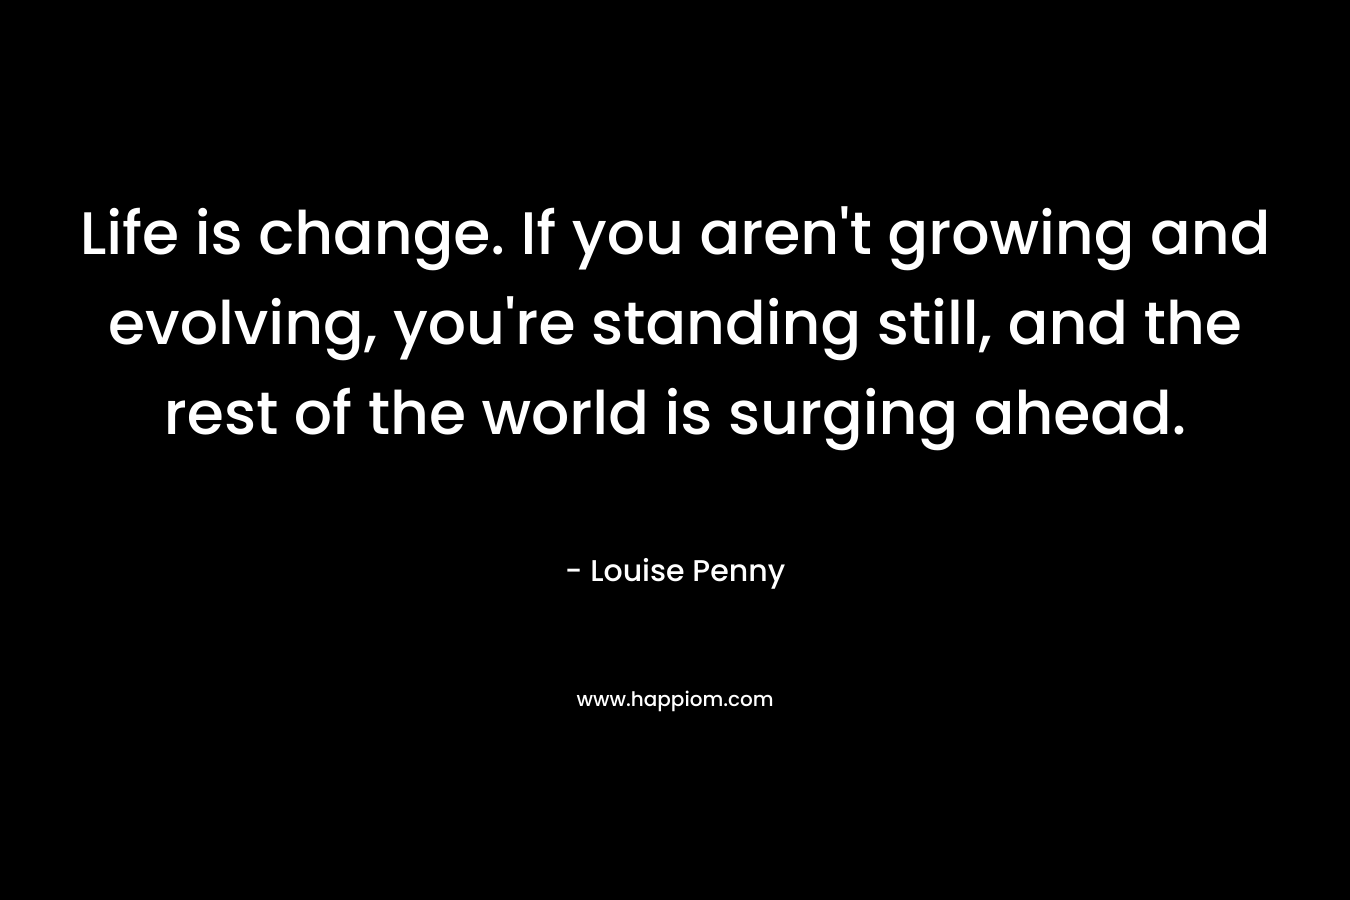 Life is change. If you aren’t growing and evolving, you’re standing still, and the rest of the world is surging ahead. – Louise Penny